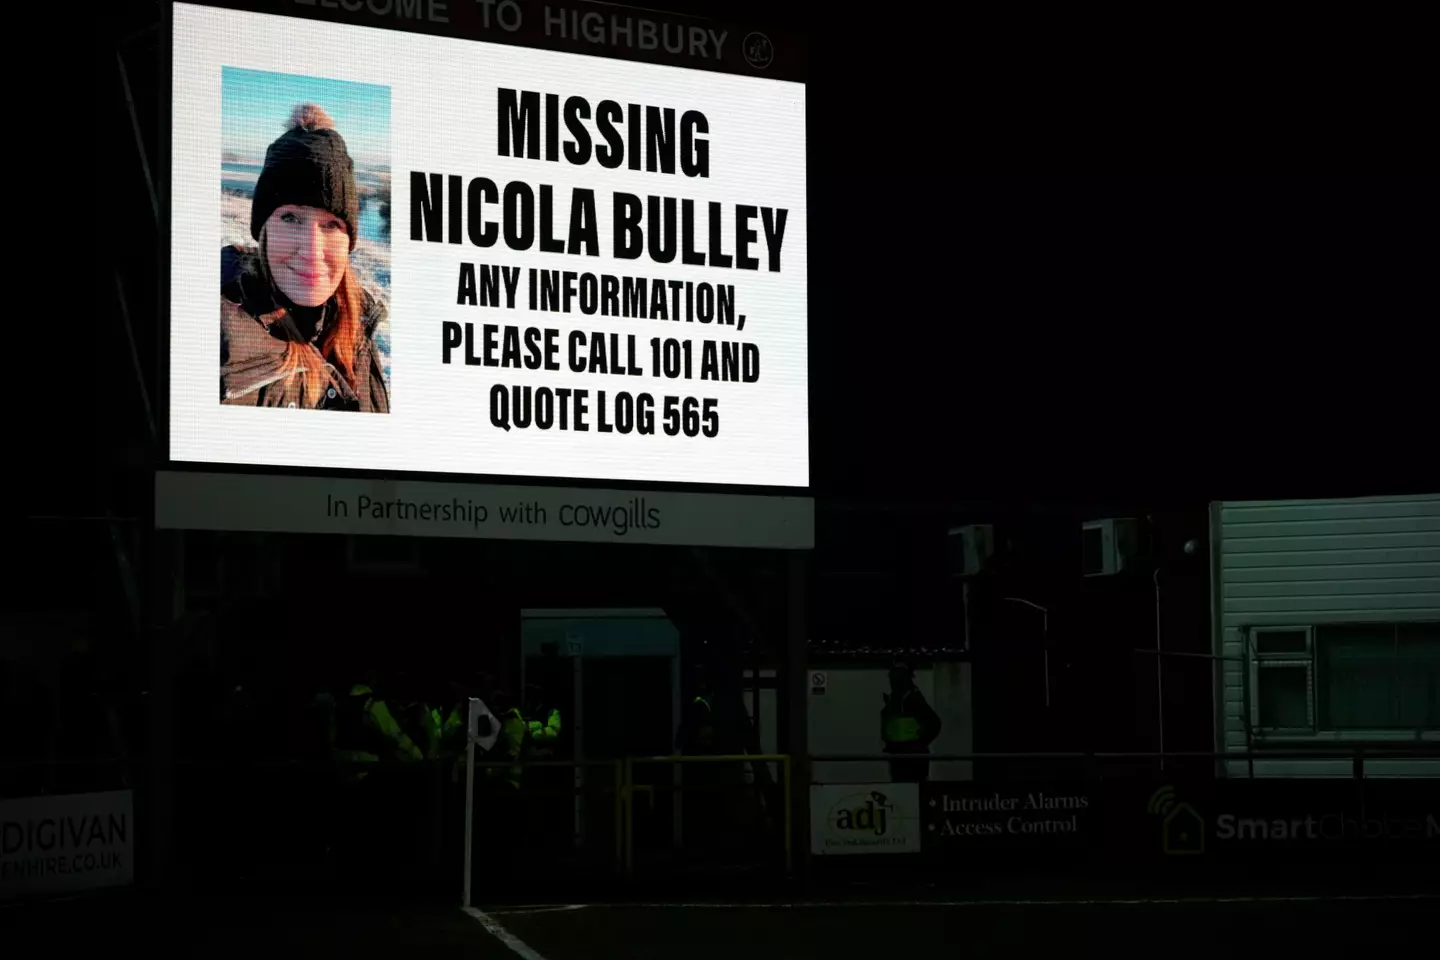 Bulley went missing while walking her dog.